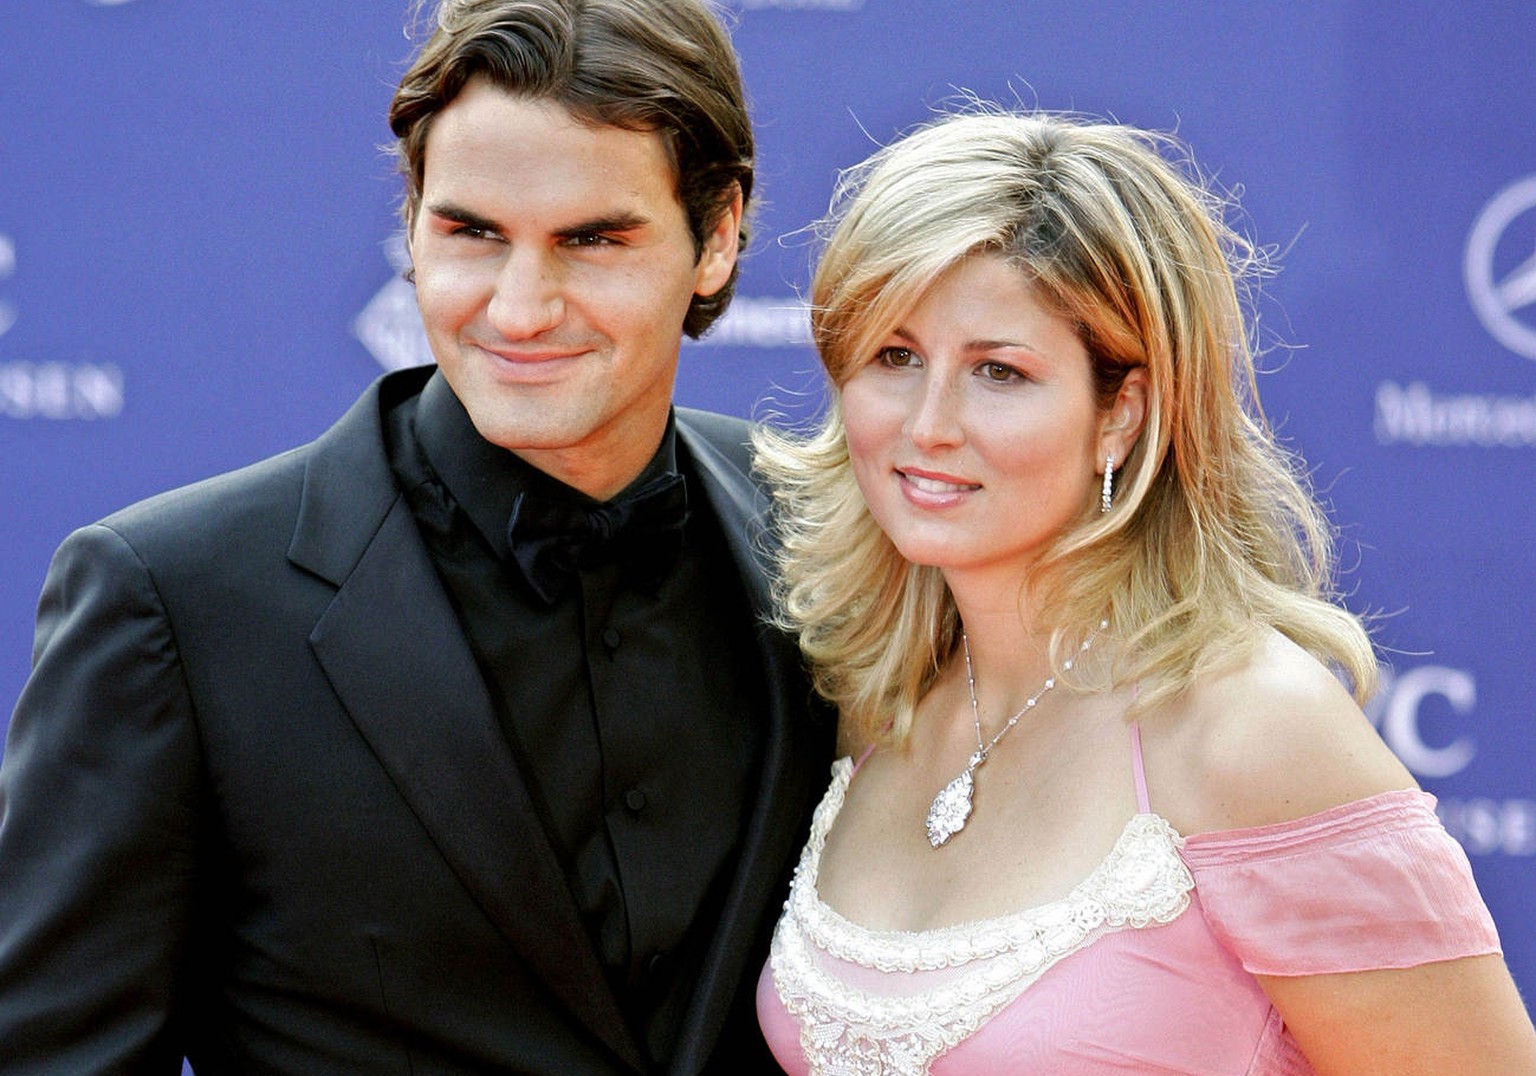 In this Monday May 22, 2006 photo Swiss tennis player Roger Federer and his partner Mirka Vavrinec pose for photographers as they arrive for the Laureus World Sports Awards in Barcelona, Spain. Federe ...